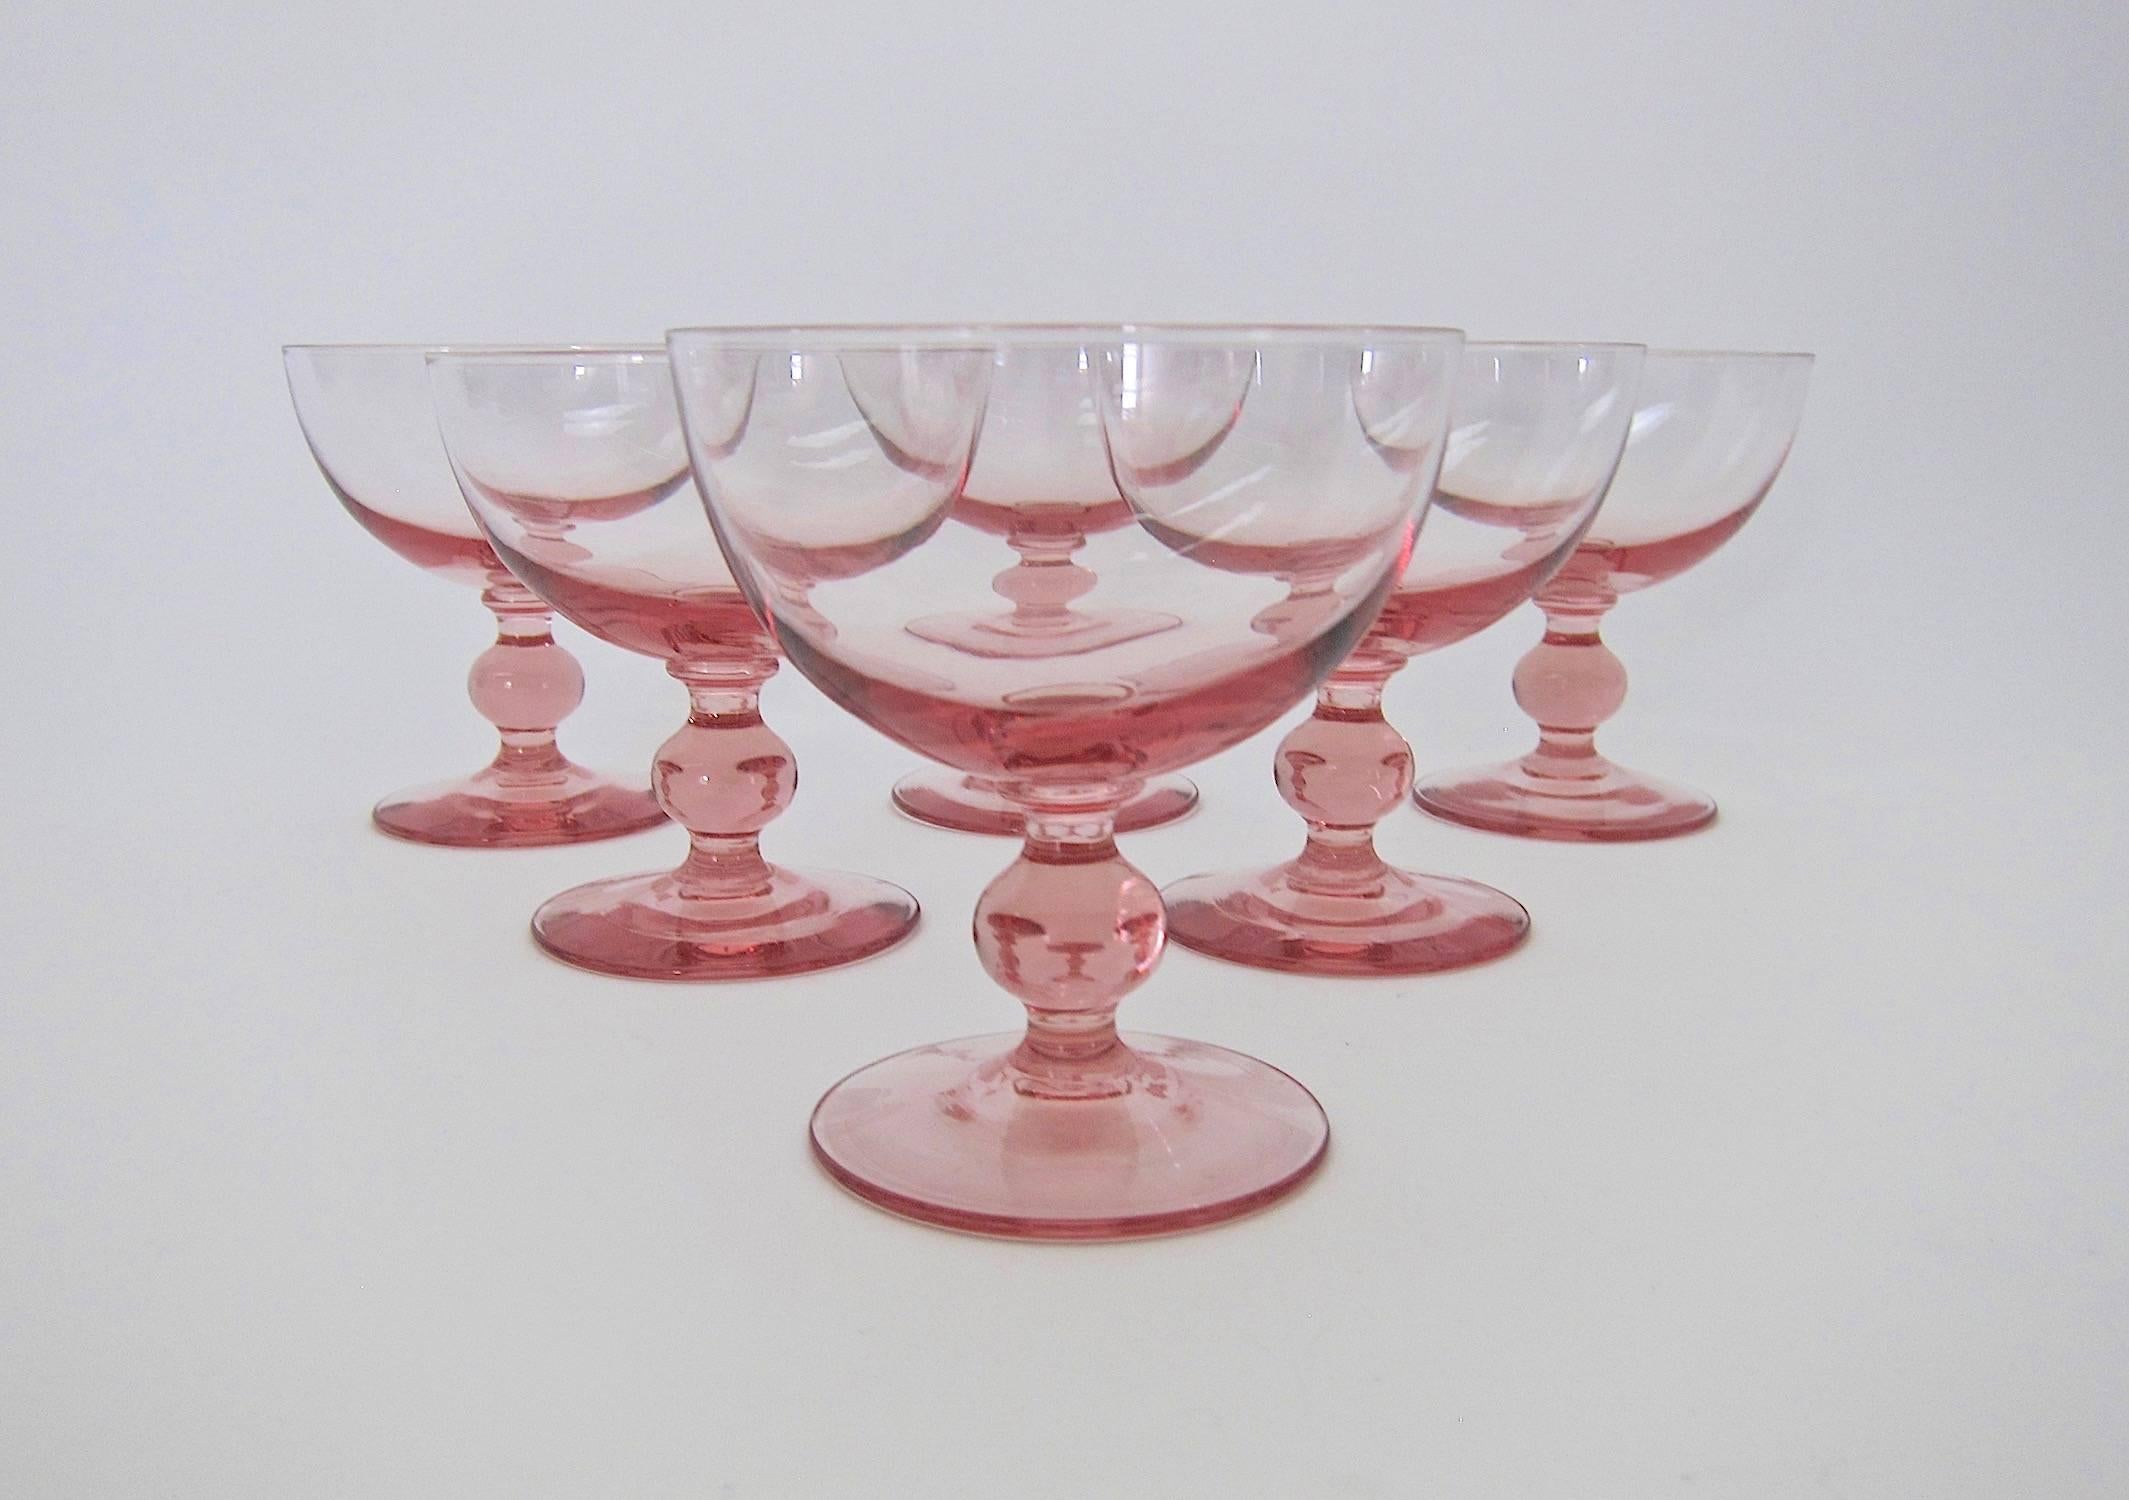 A vintage set of six coupe glasses in pale pink with knopped stems, perfectly sized for champagne, cocktails, or sherbet.

Unmarked and in very good condition, measuring 4 in. H x 3.75 in. Diameter (at rim); each glass holds 7 oz. filled to the